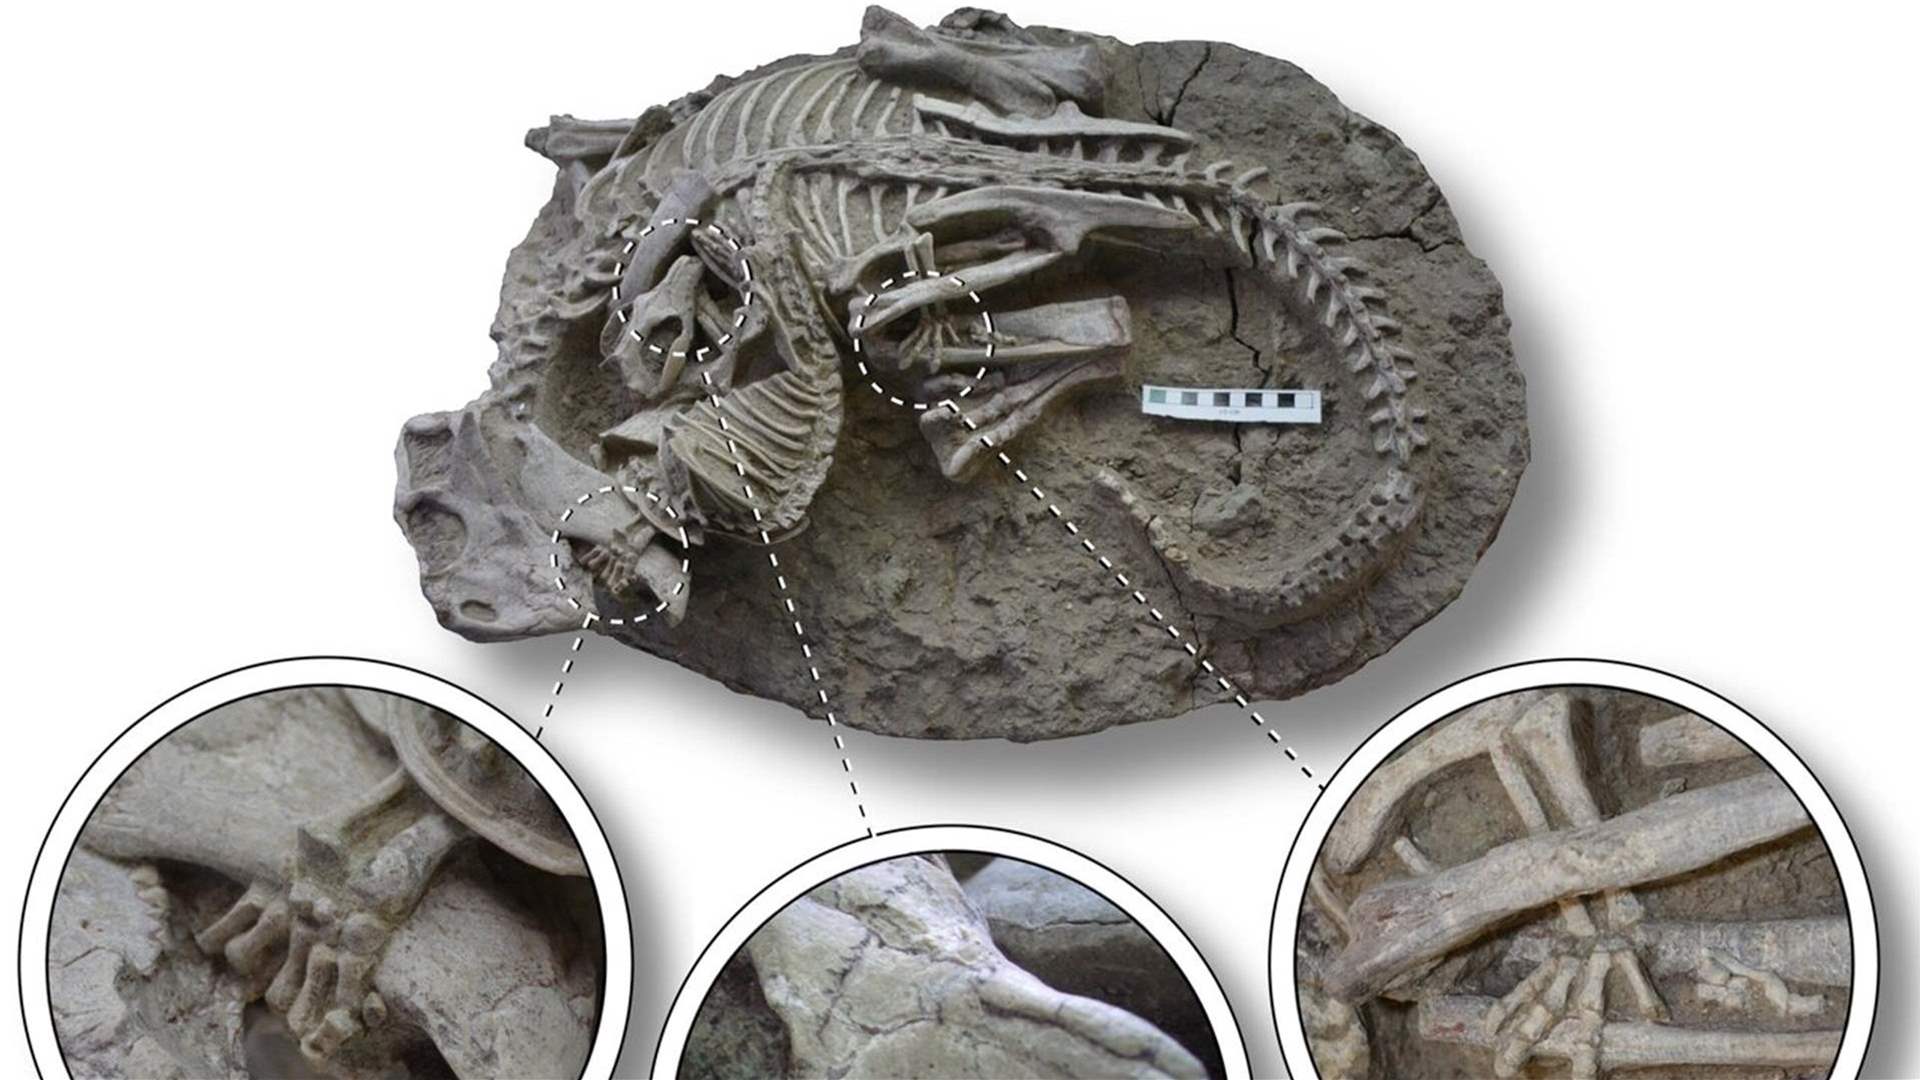 Fossilized discovery in China of a mammal attacking a dinosaur